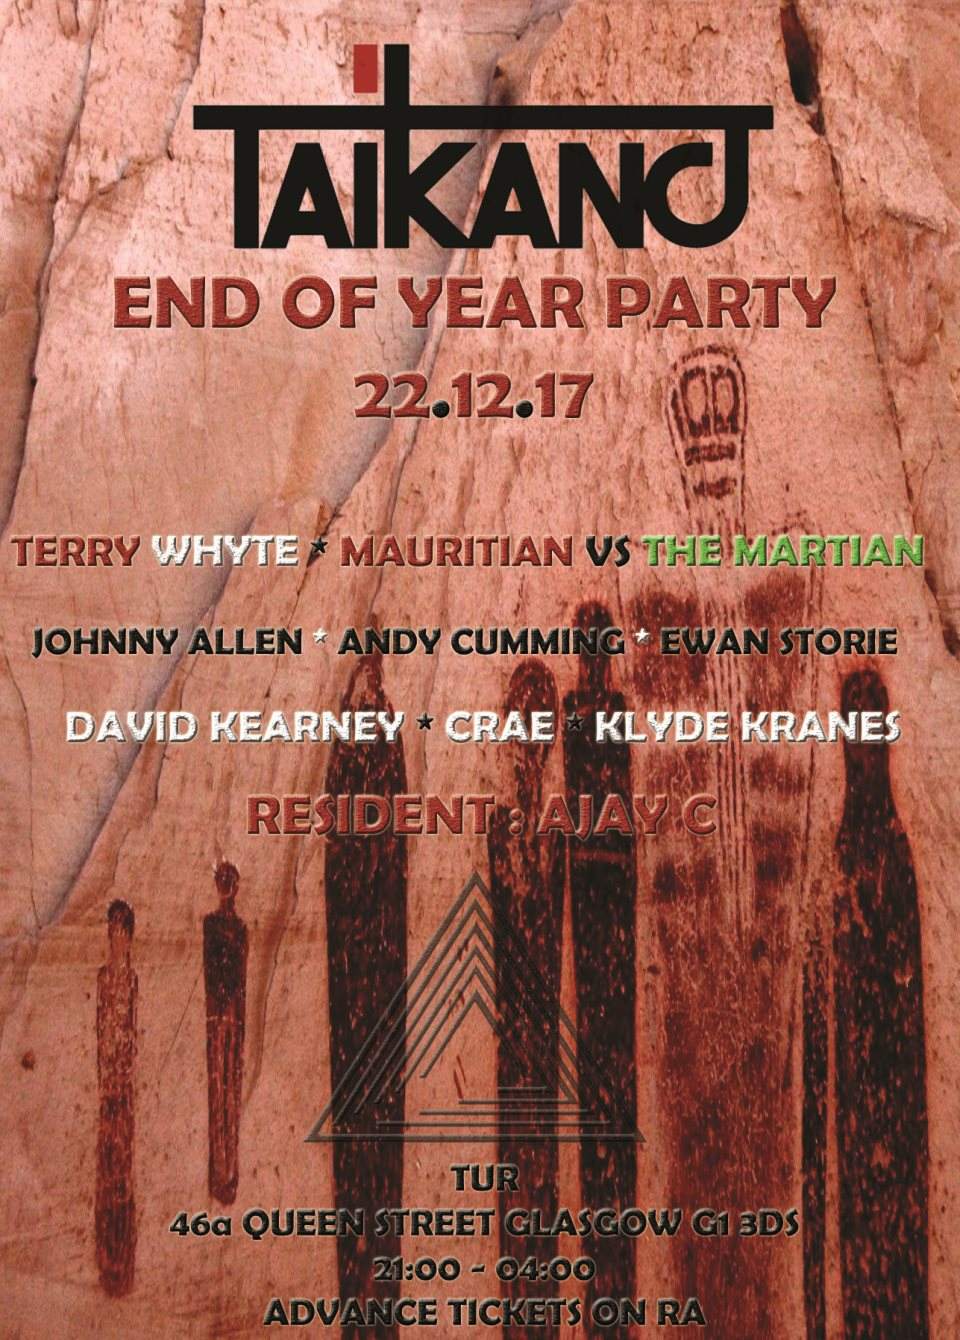 Taikano End Of Year Party with Terry Whyte/Johnny Allen/Ewan Storie - Página frontal